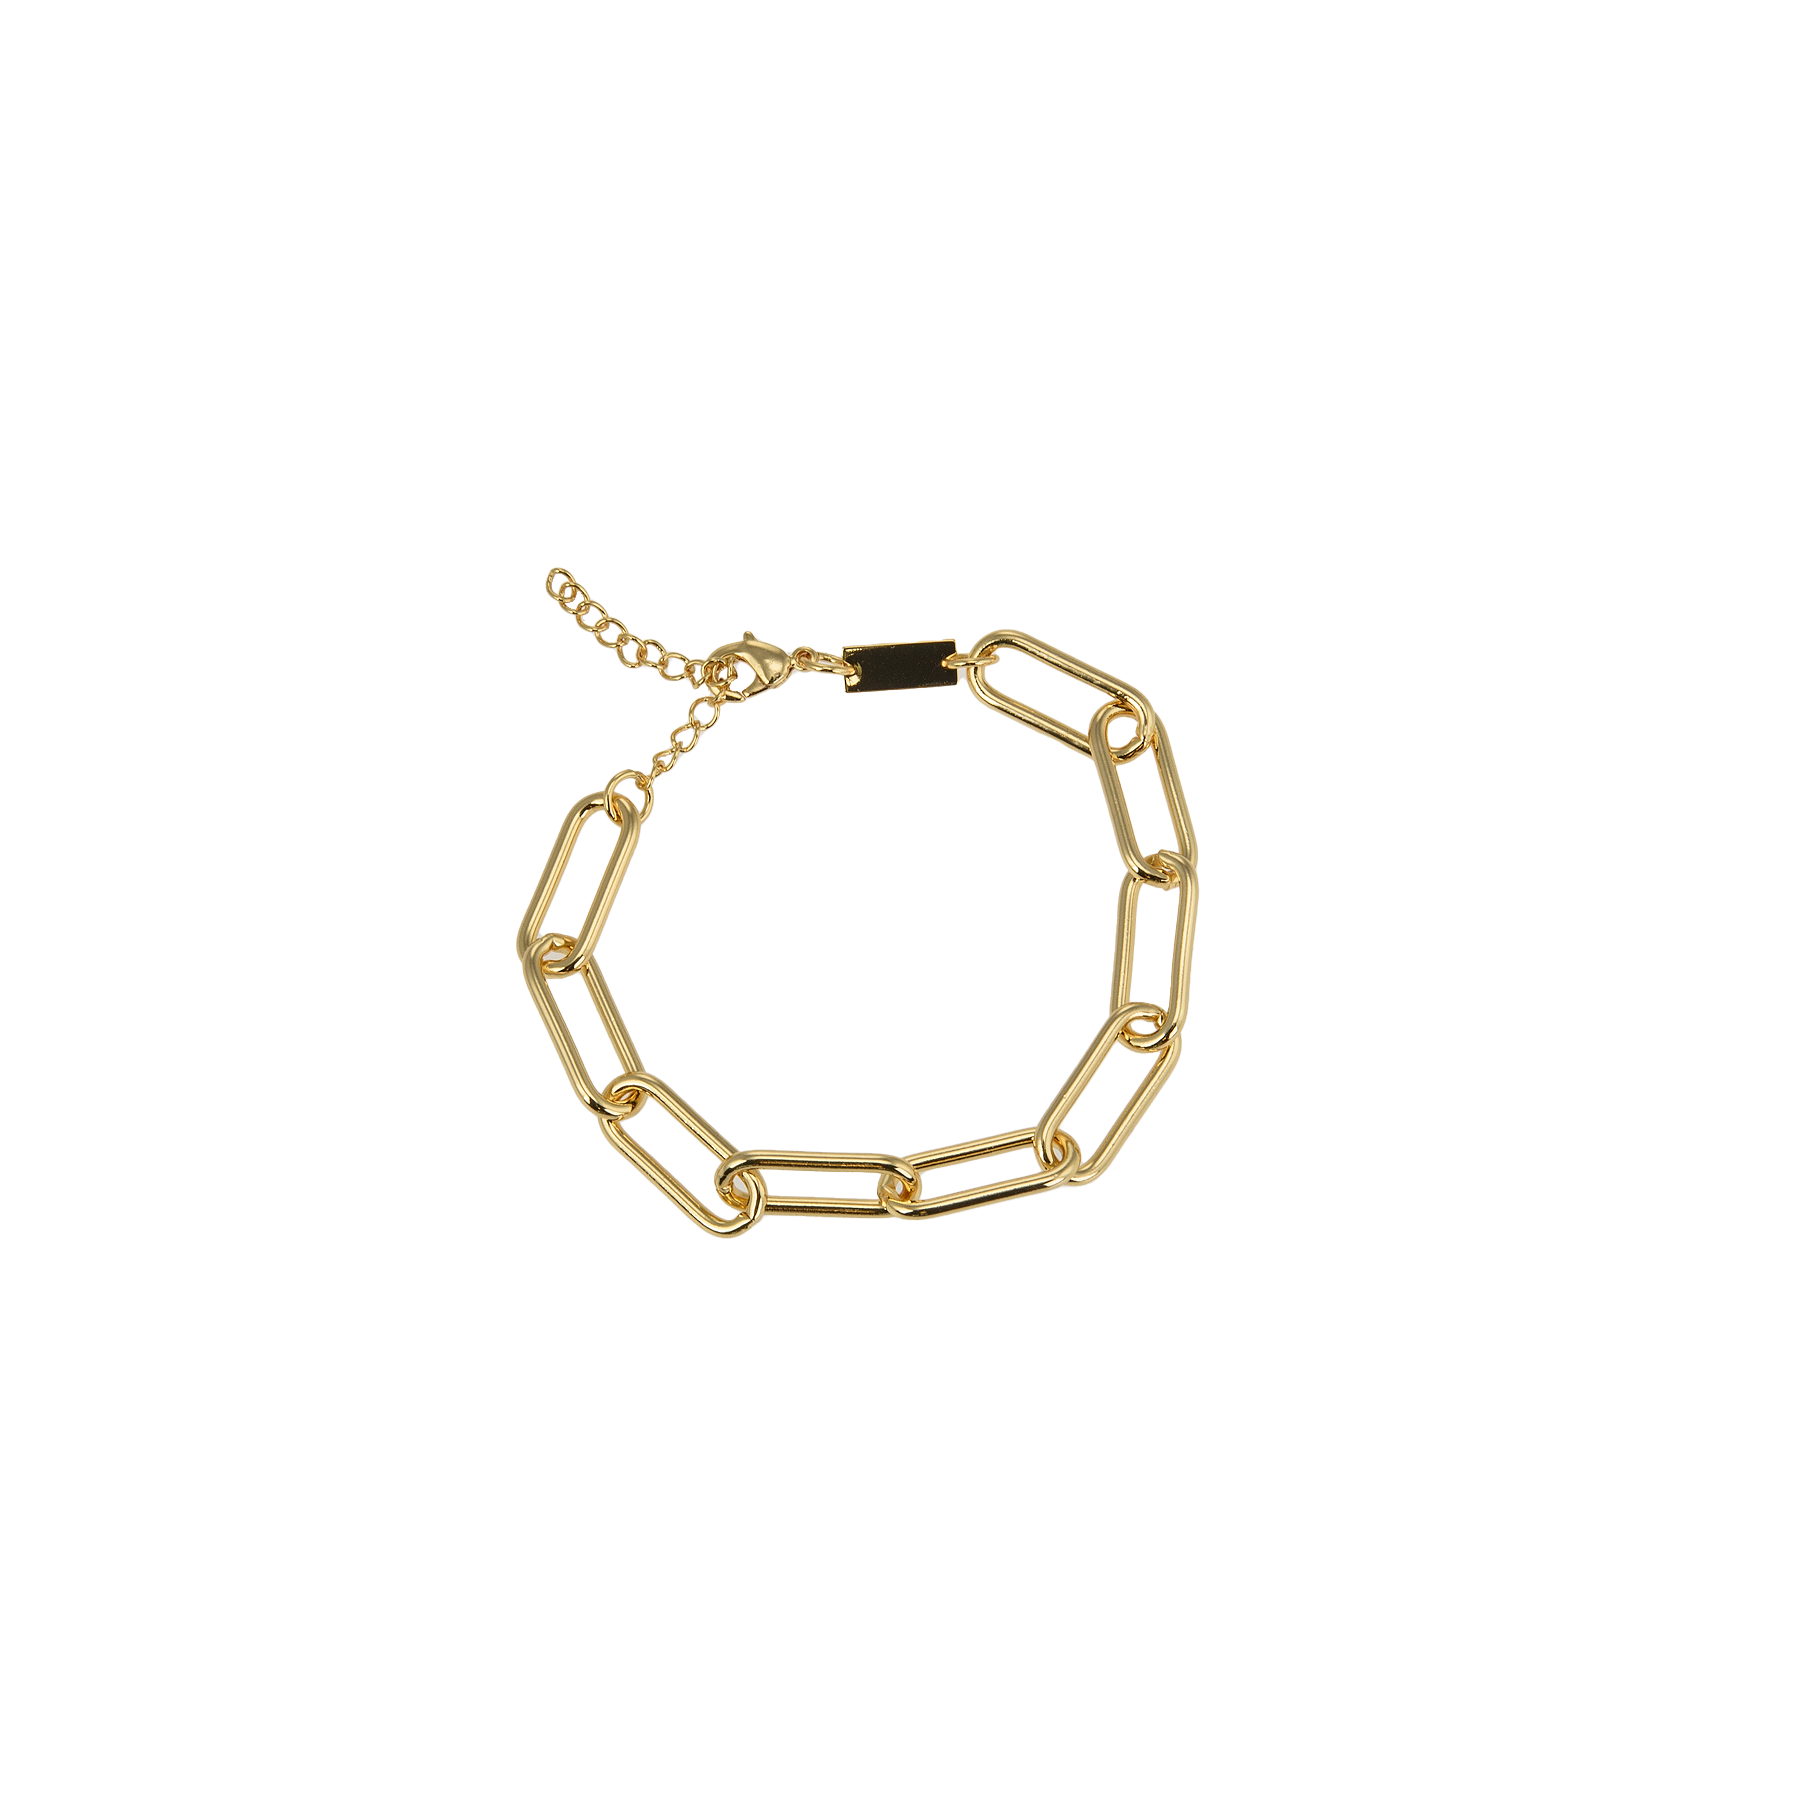 Image of The Chain bracelet 16-20 cm from Emilia by Bon Dep